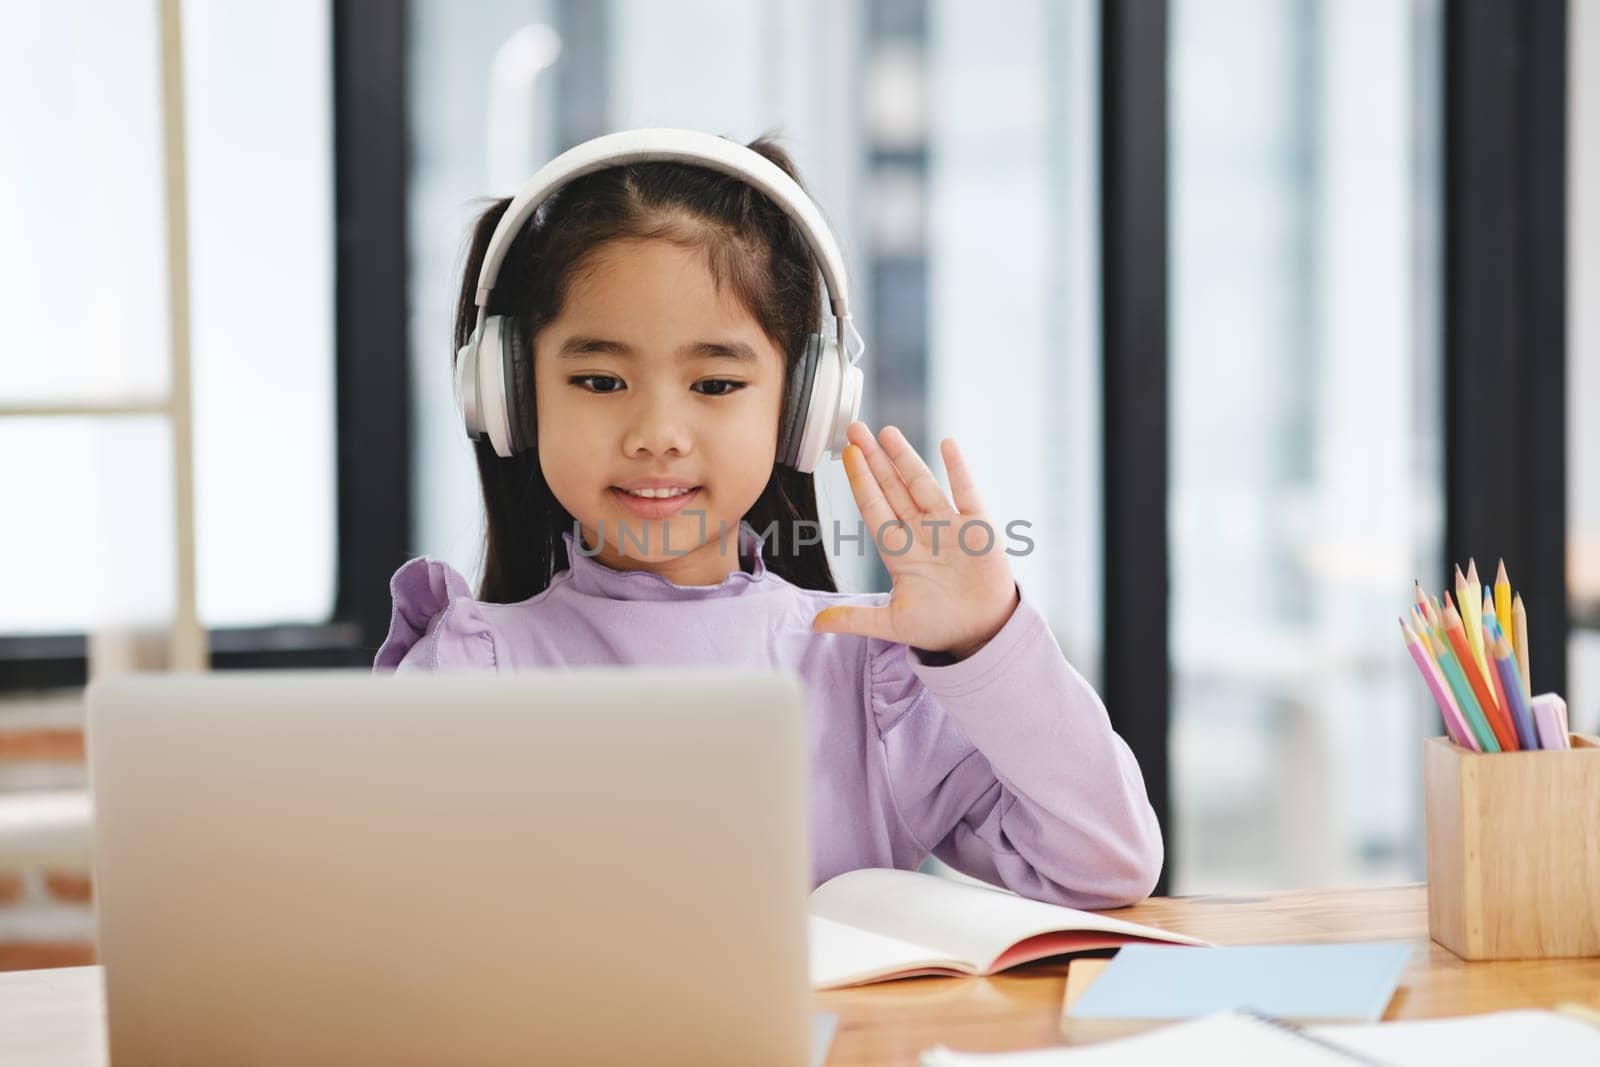 A young girl wearing headphones is waving at the camera while sitting at a desk by ijeab